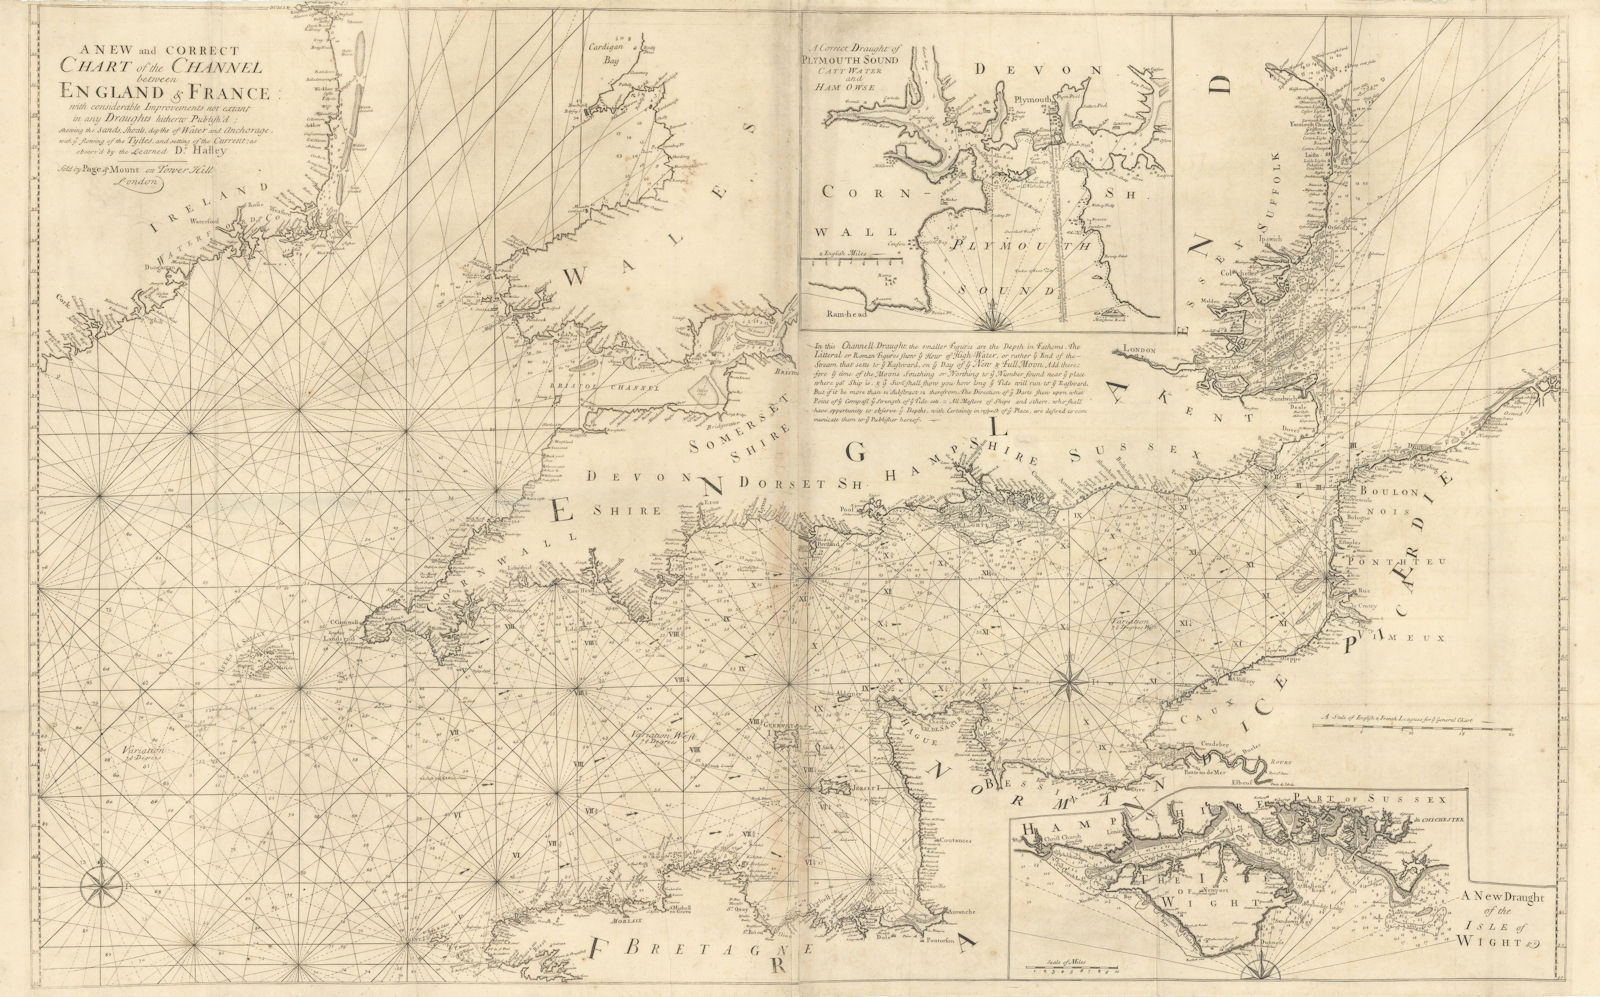 Associate Product A new & correct chart of the Channel between England & France. COLLINS 1723 map